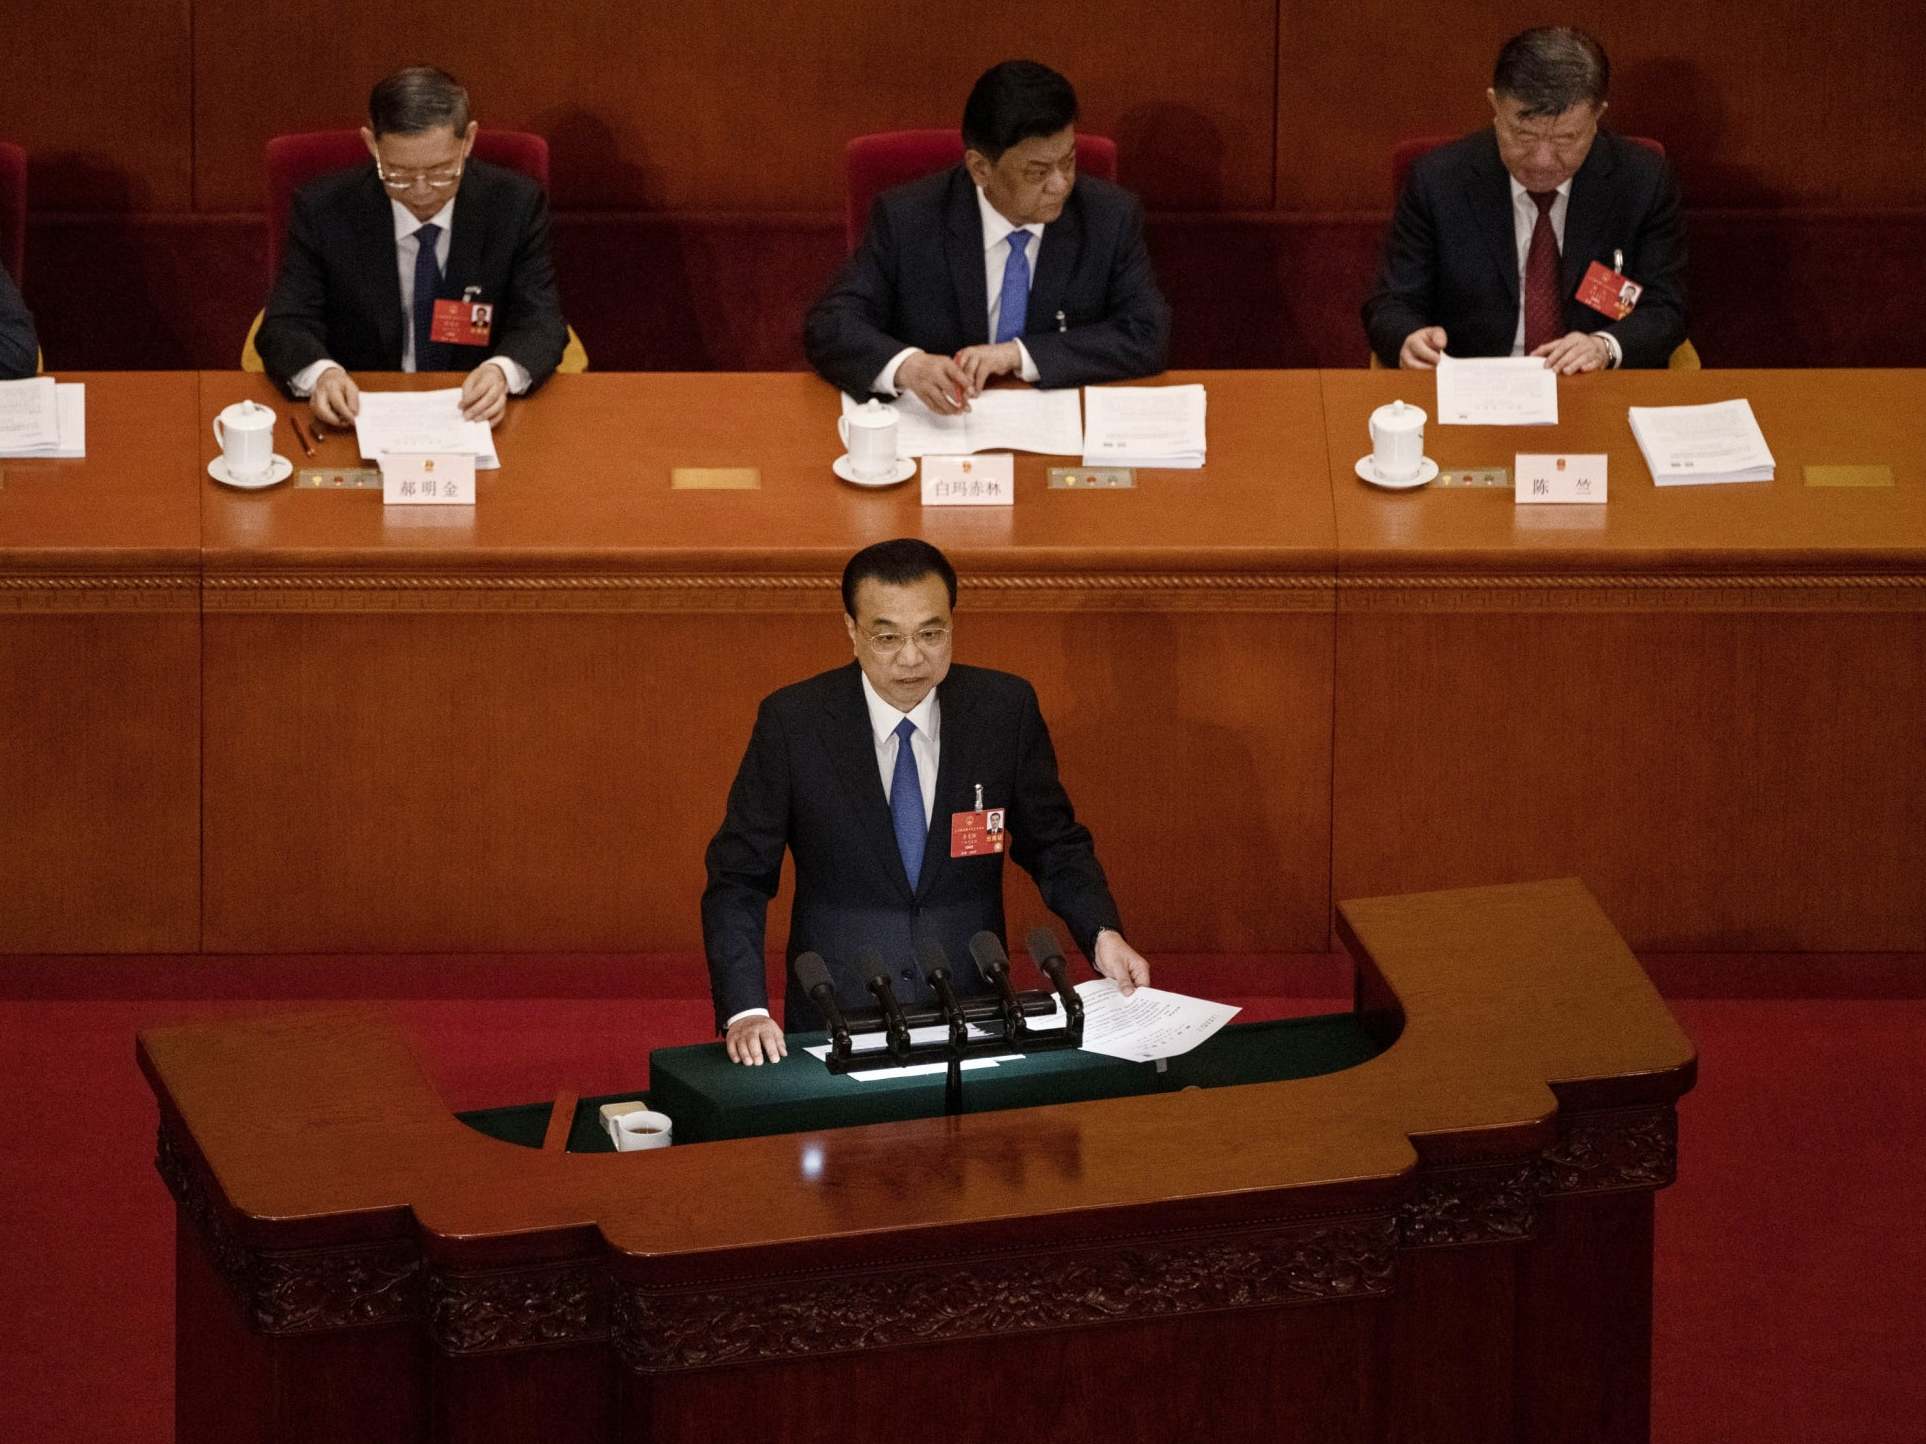 Chinese premier Li Keqiang revealed the growth measure at the opening of the National People's Congress in Beijing on Friday